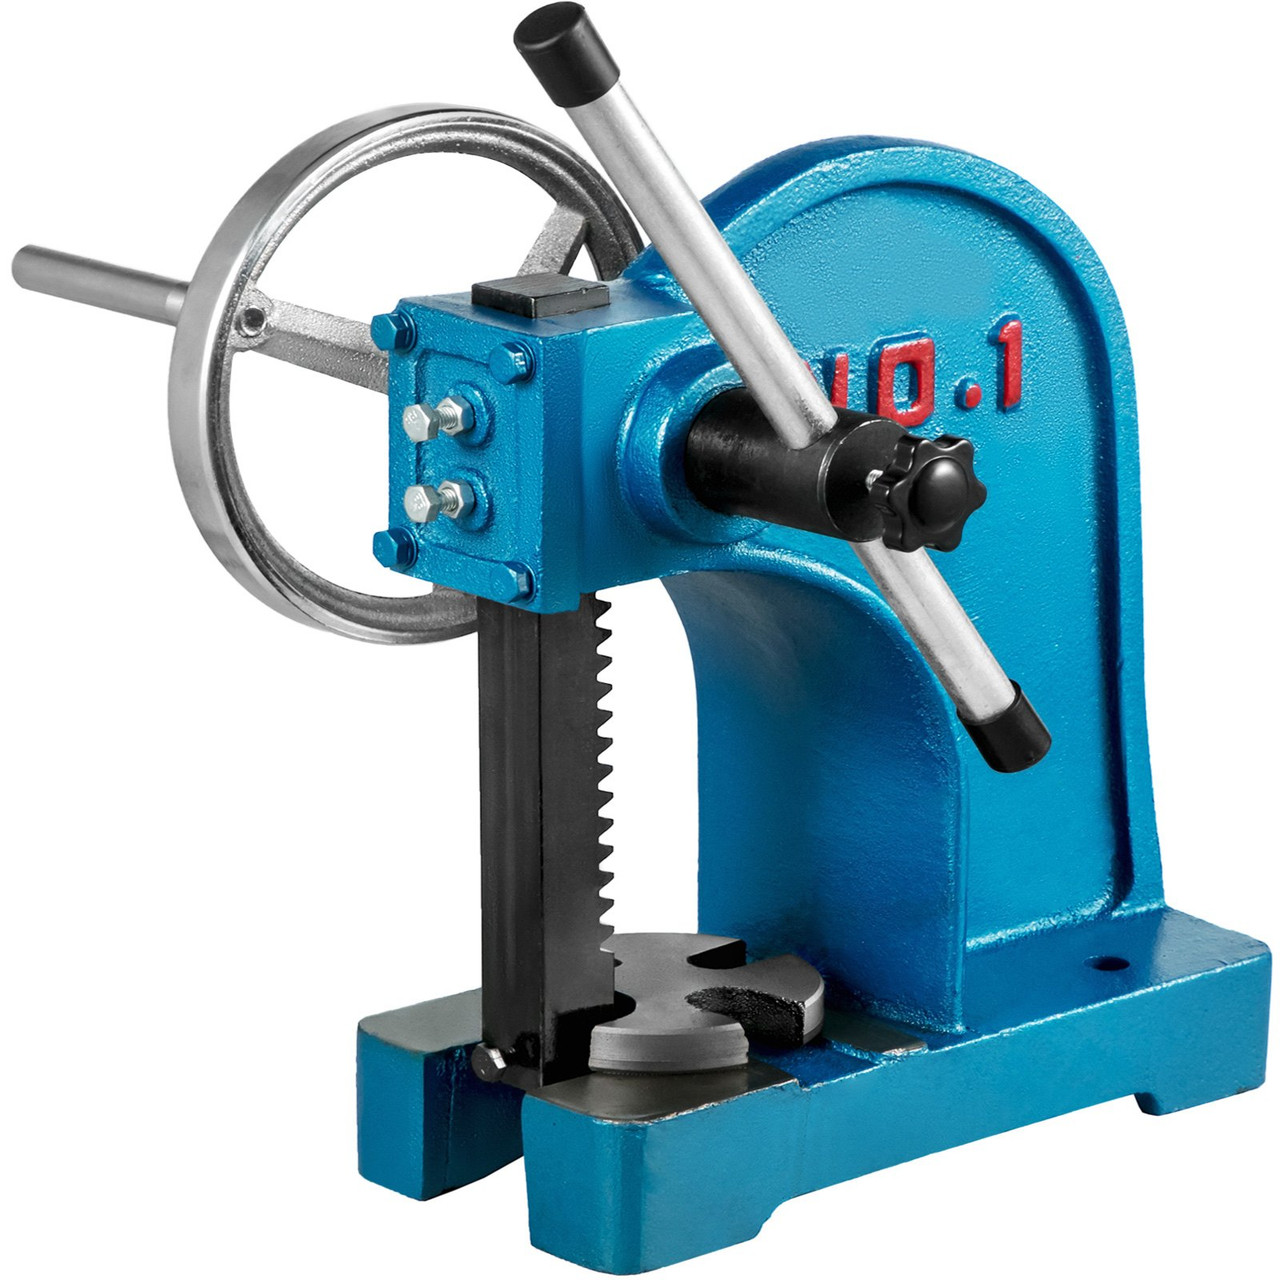 Heavy Duty Arbor Press 1 Ton, Ratchet Leverage Arbor Press with Handwheel, Manual Desktop Metal Arbor Press 4-5/8 Inch Max. Working Height, for Riveting Punching Holes